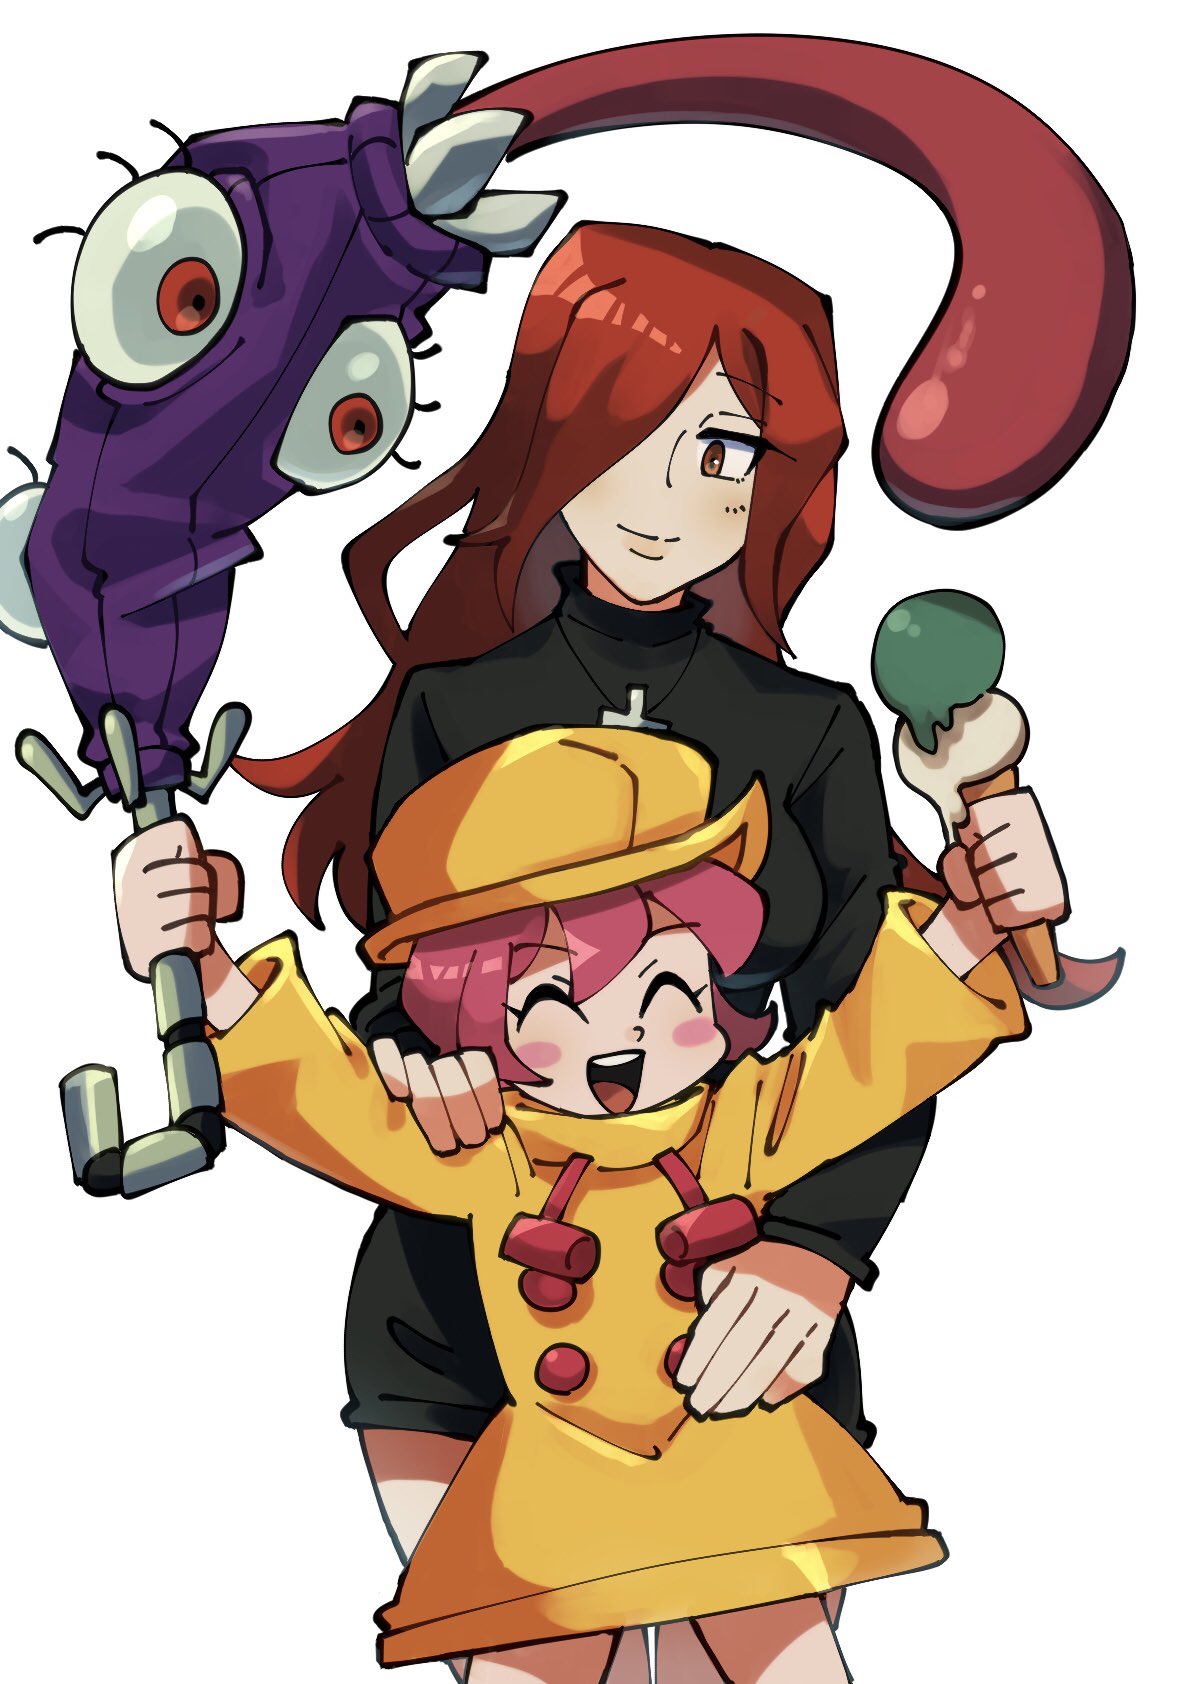 2girls blush brown_eyes cross cross_necklace dress food hair_over_one_eye happy height_difference highres holding holding_food holding_ice_cream holding_umbrella hungern_(skullgirls) ice_cream jewelry multiple_girls necklace oushiza_towel parasoul_(skullgirls) pink_hair red_eyes red_hair sharp_teeth skullgirls smile sweater teeth tongue turtleneck turtleneck_sweater umbrella umbrella_(skullgirls) yellow_dress yuri